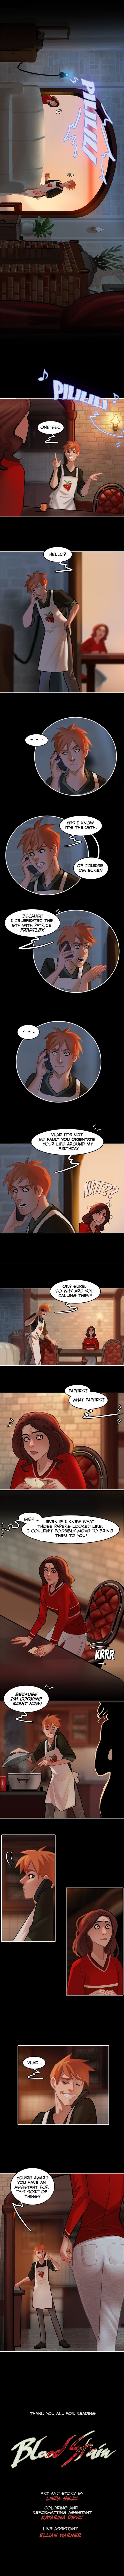 Blood Stain ch. 4 (ongoing) [Linda Sejic / Sigeel] 32